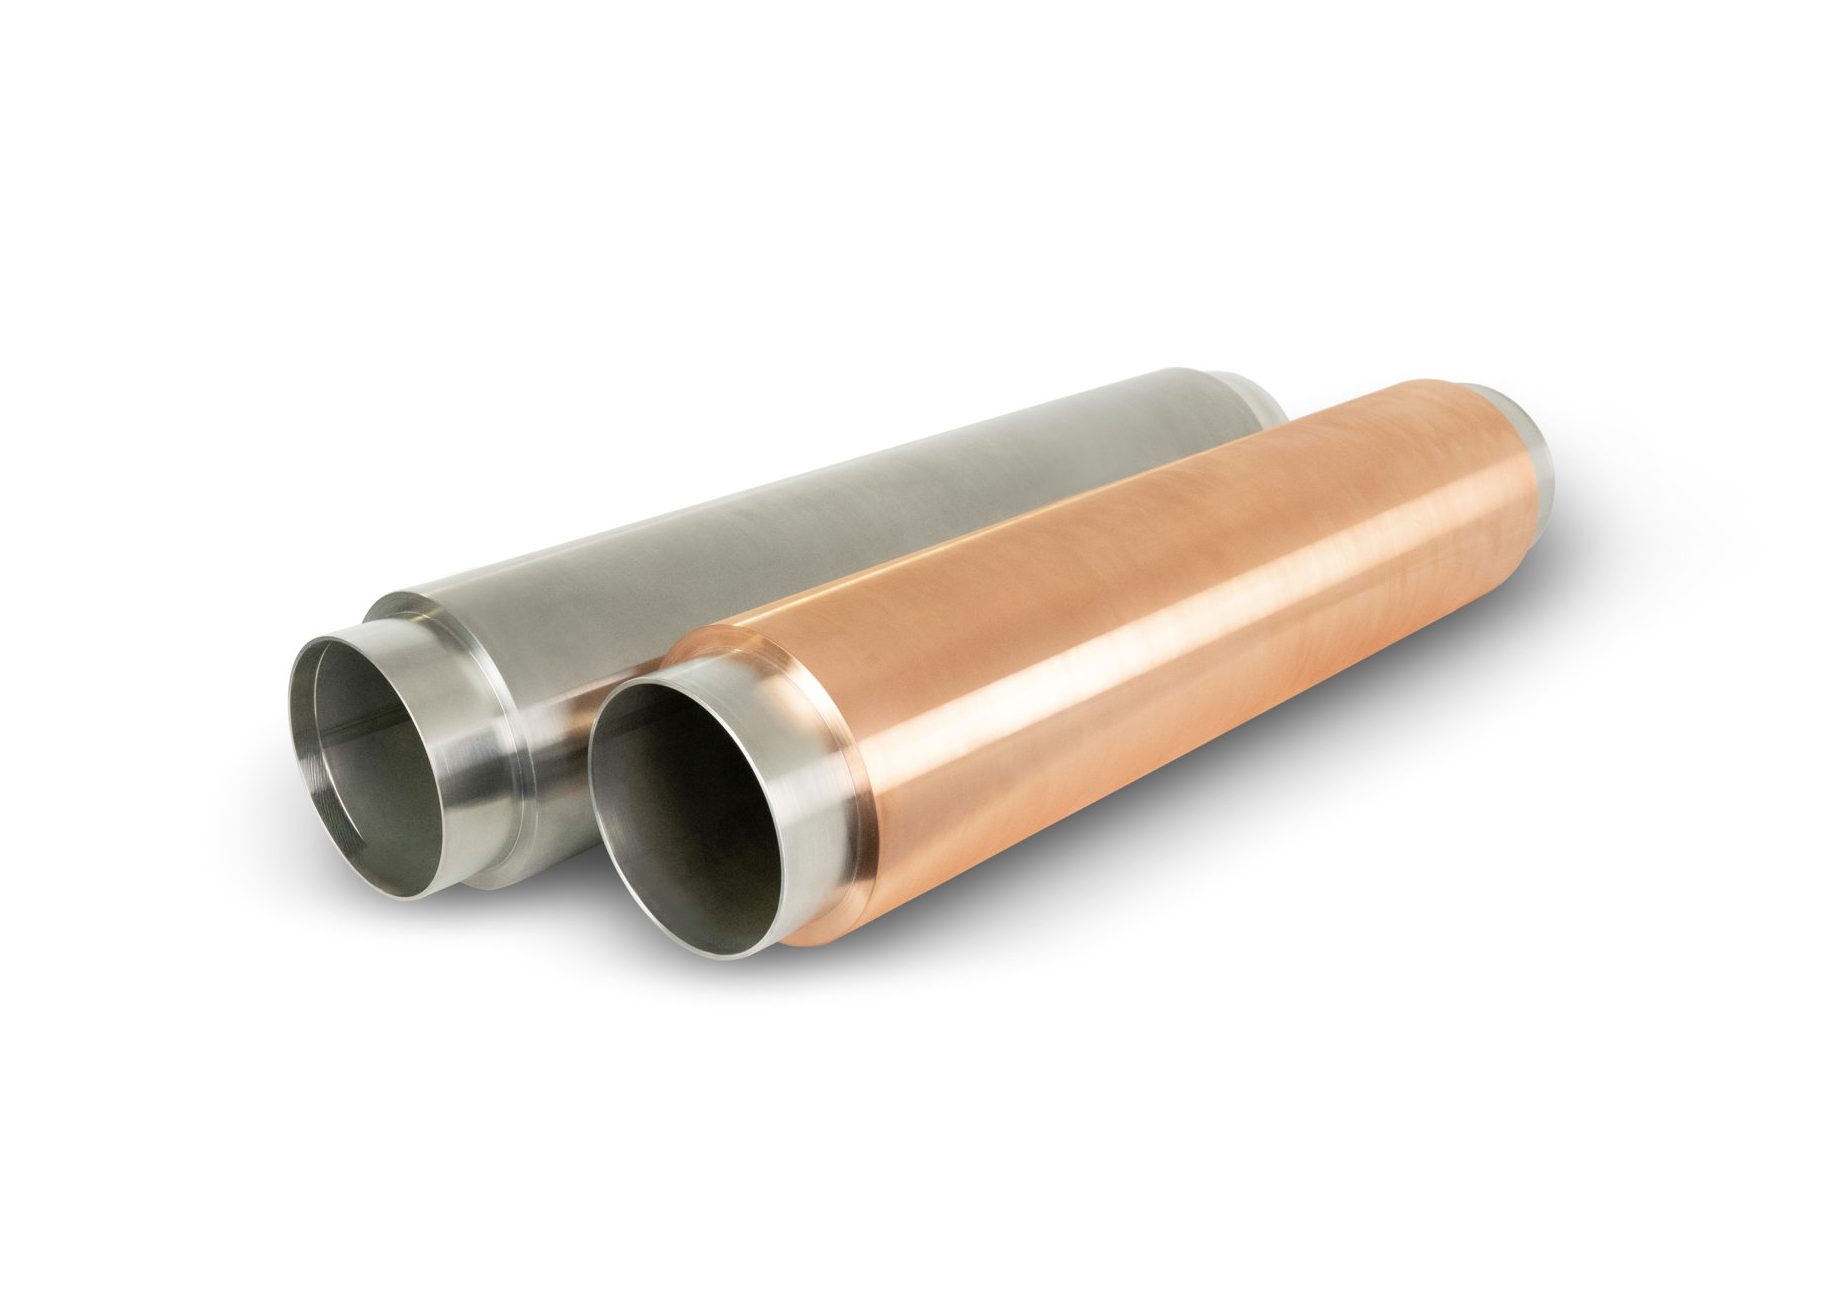 Cold Spray Copper and Steel Coating